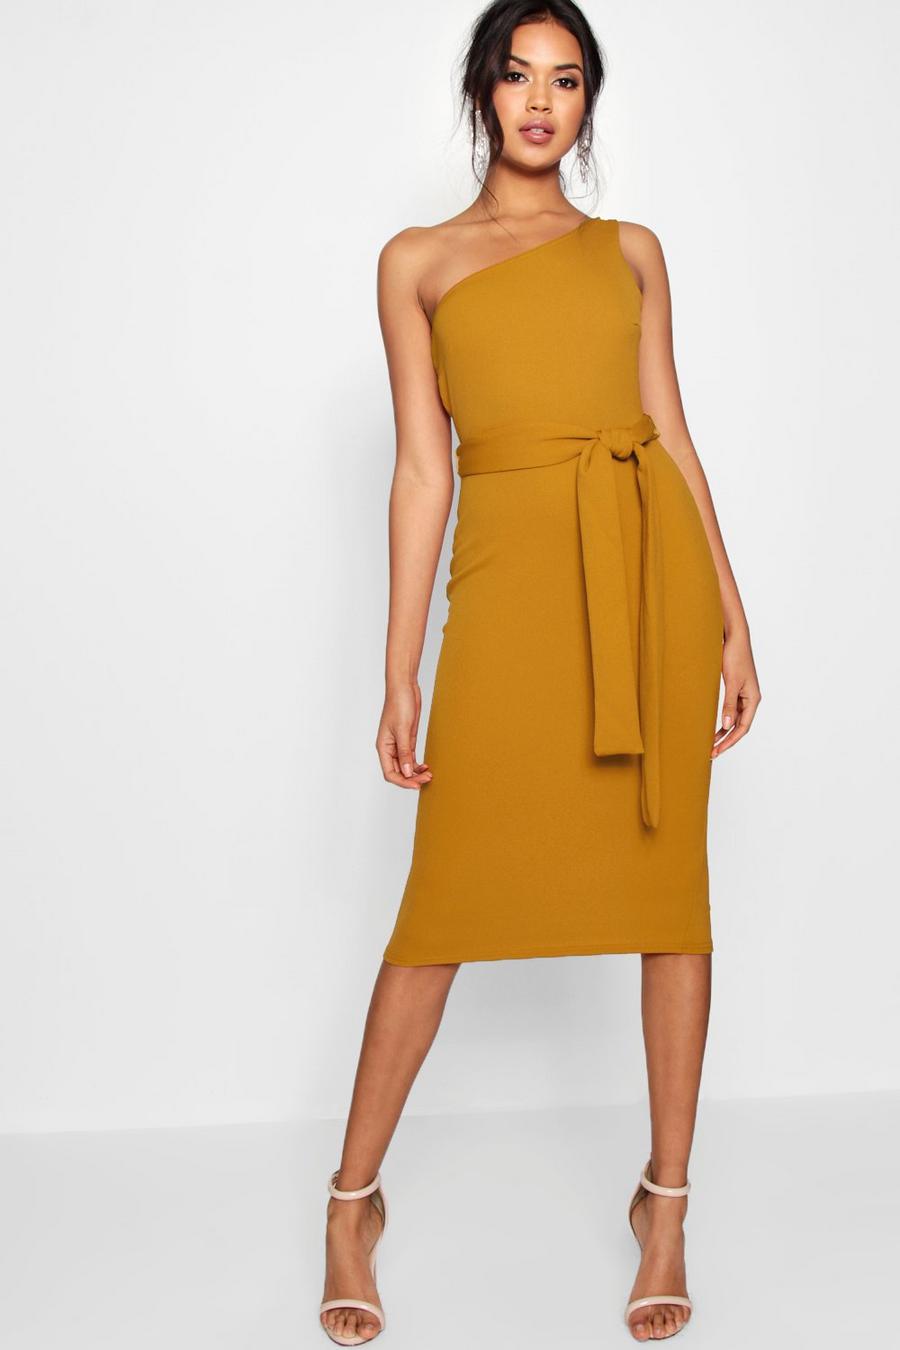 Mustard yellow One Shoulder Belted Midi Dress